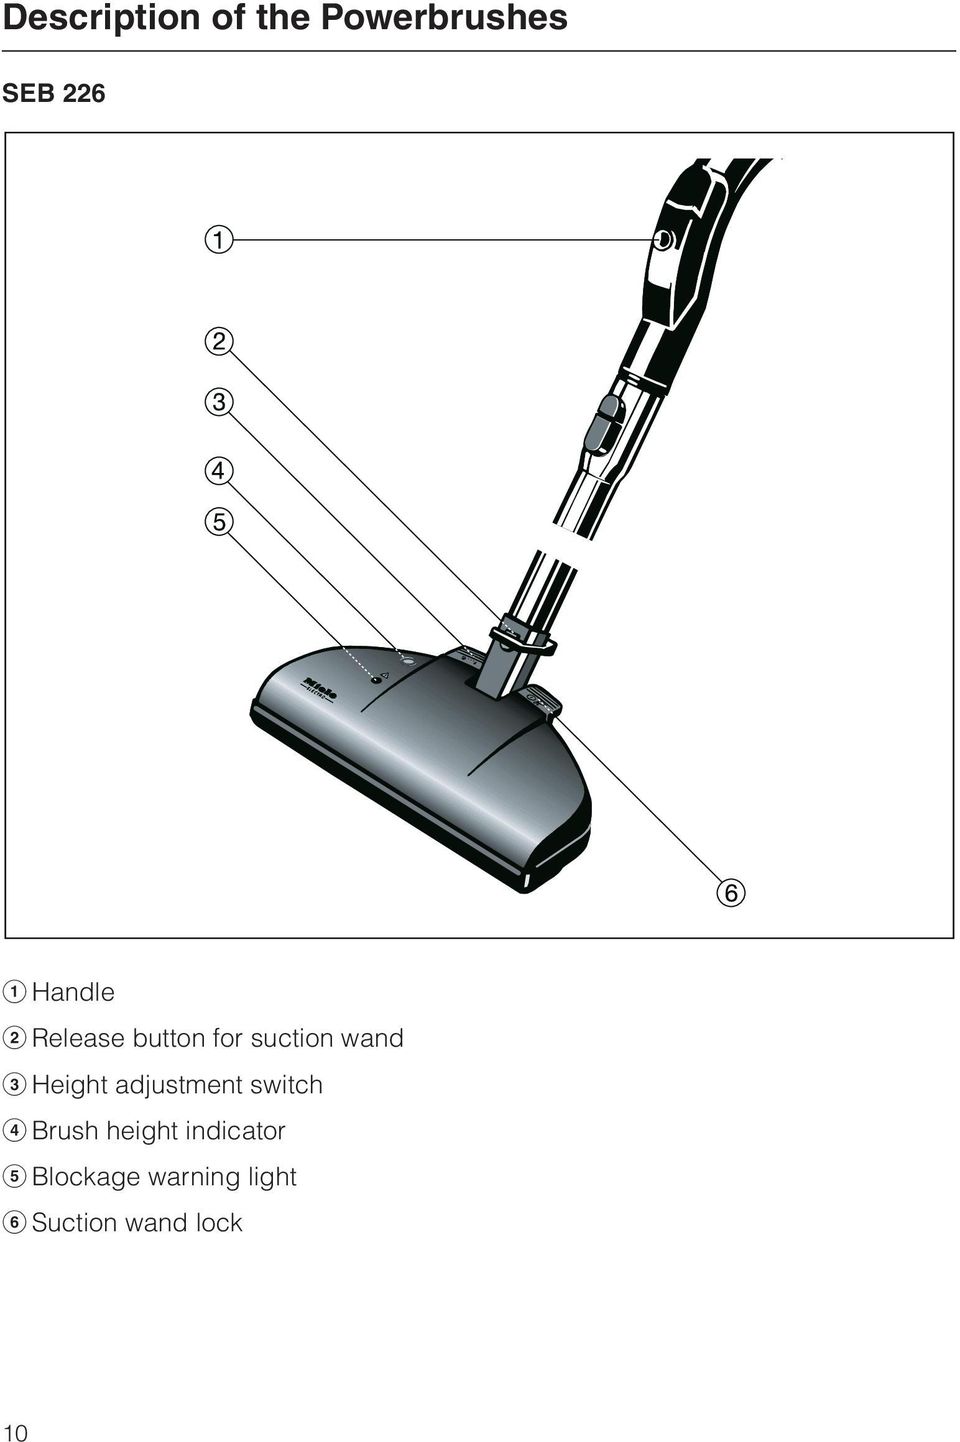 Height adjustment switch d Brush height